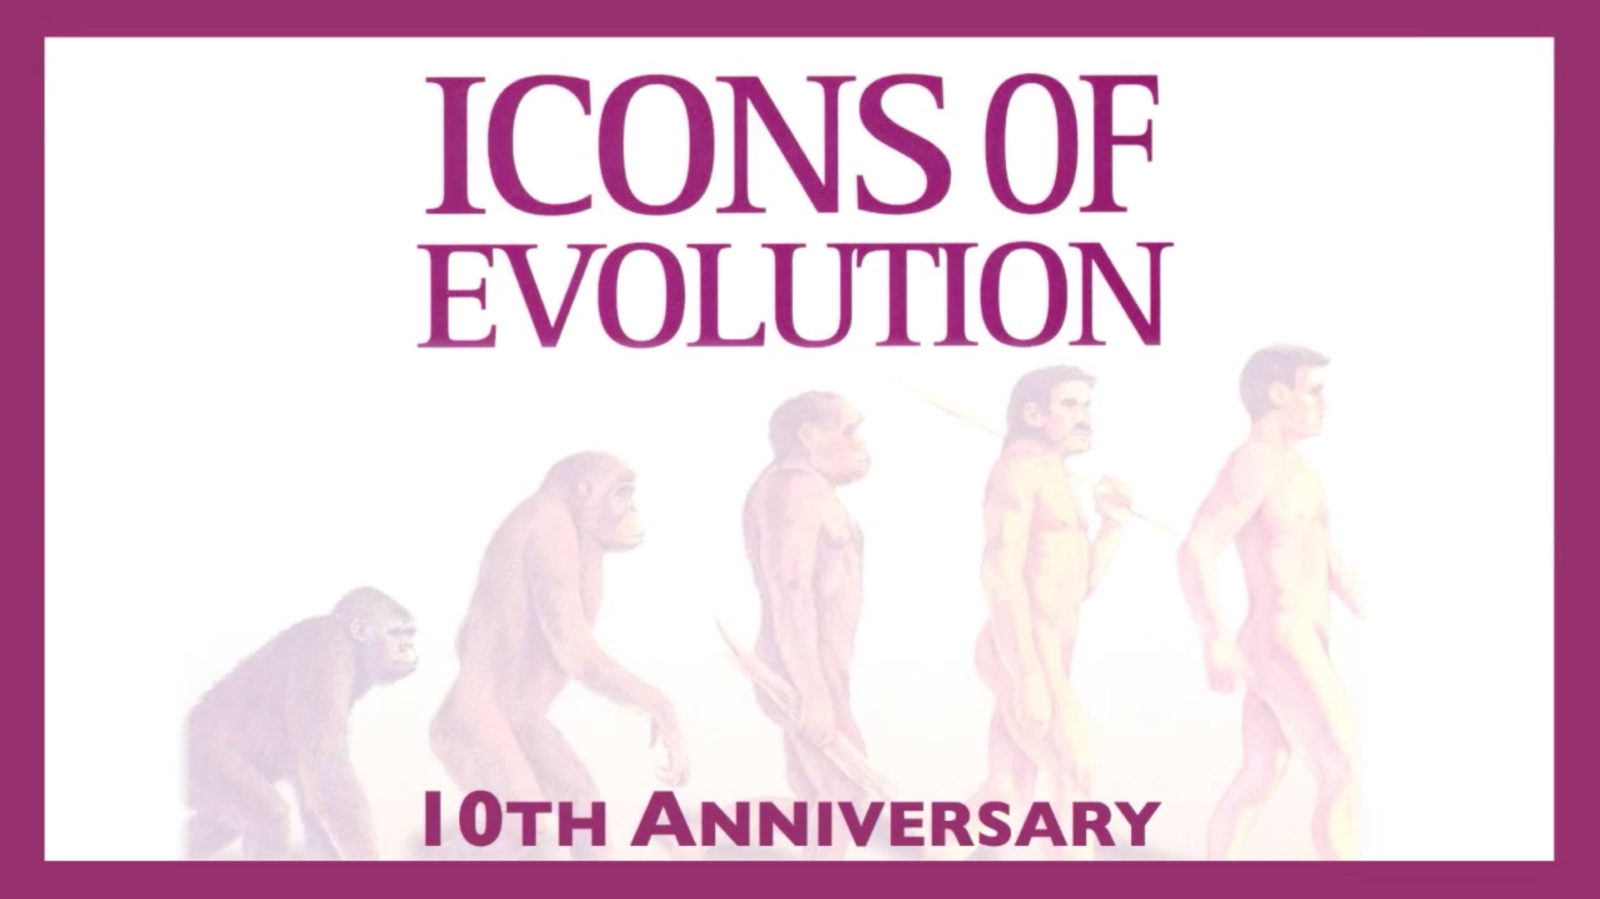 Icons of Evolution, 10th Anniversary